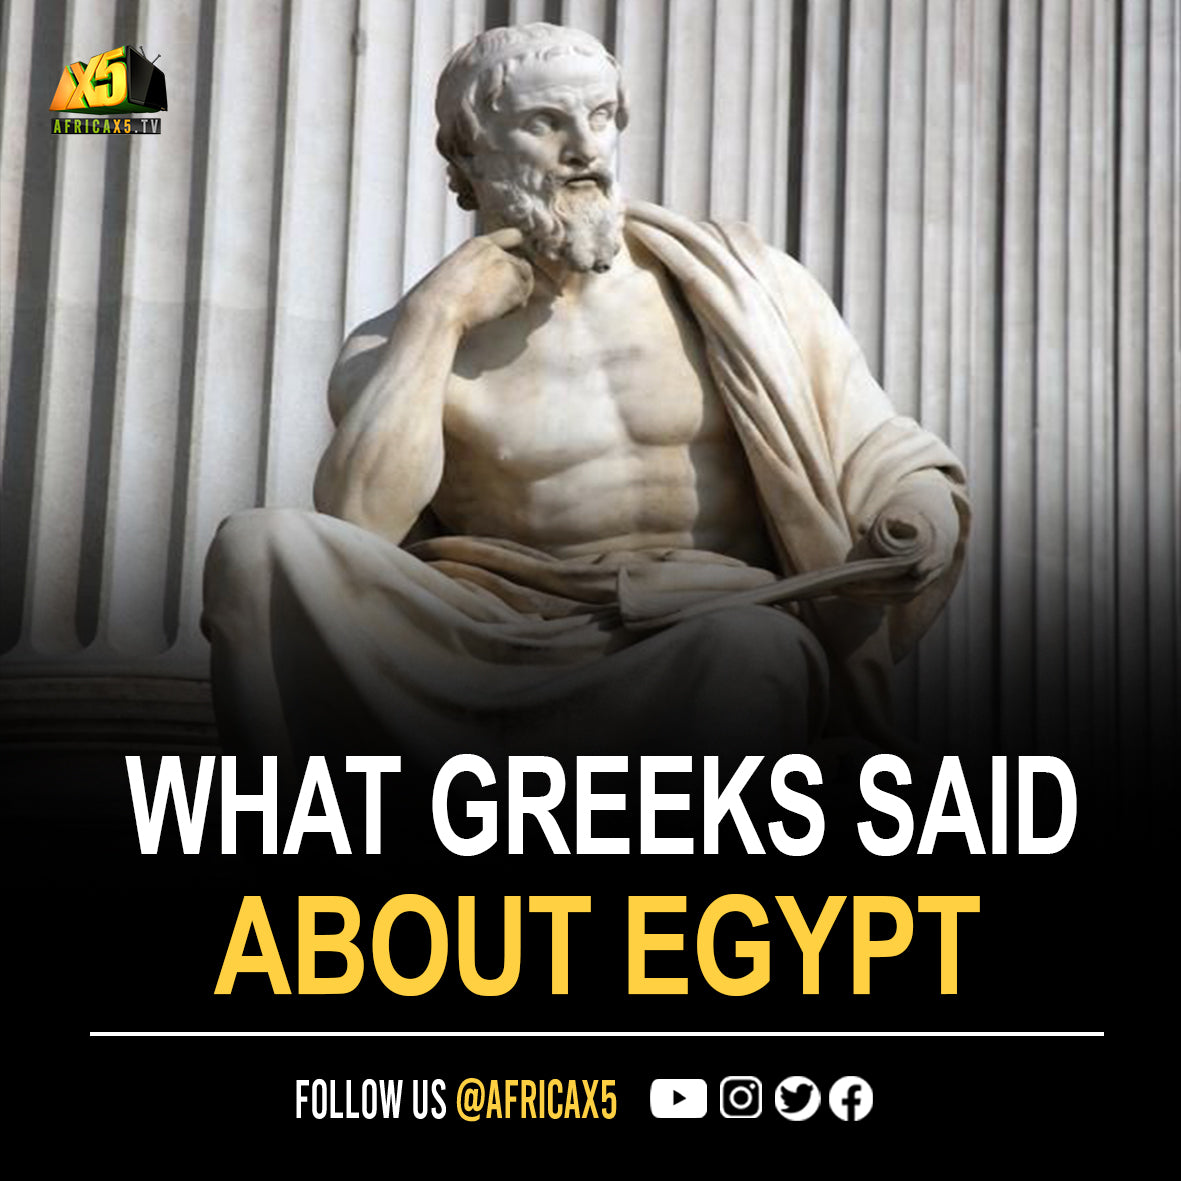 What the Greeks said about Egypt. They got everything from Egypt